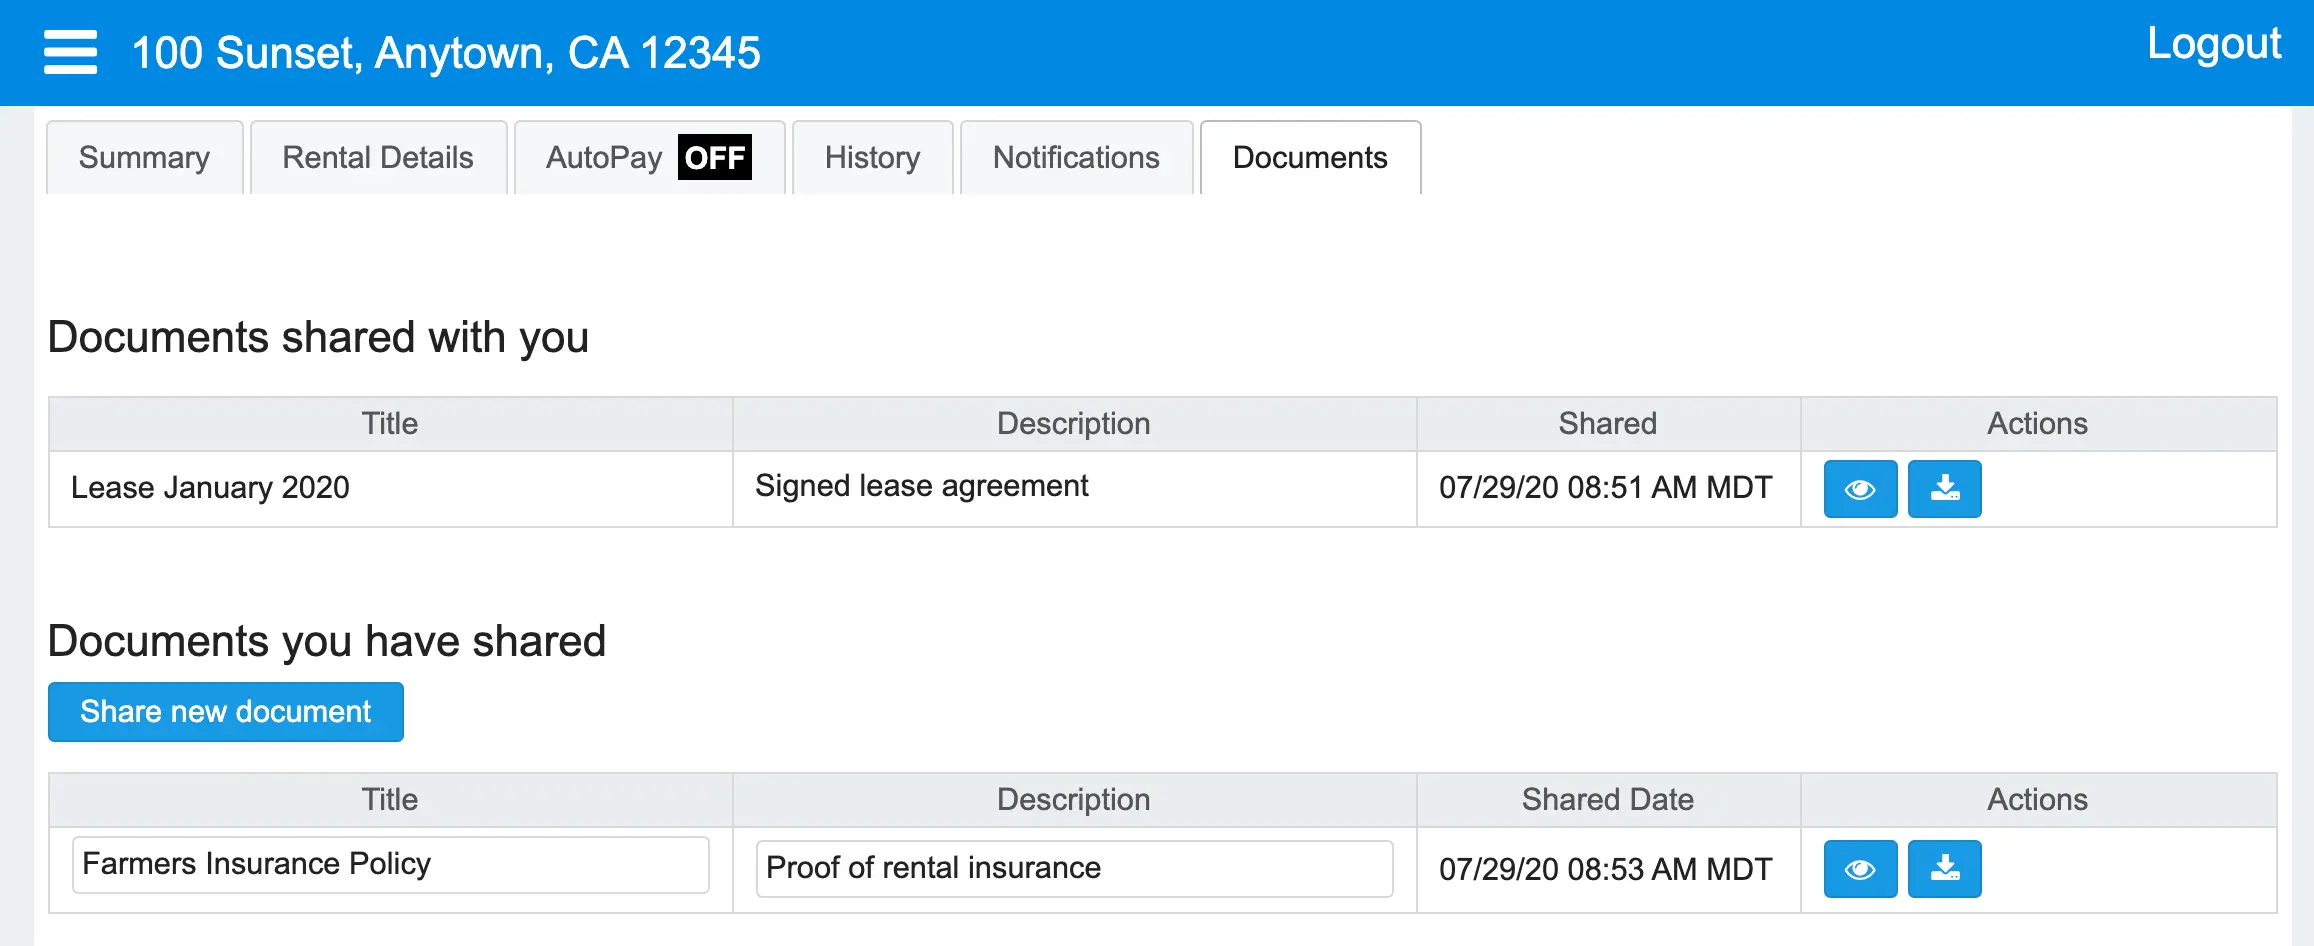 Rental Property Management Software - Tenants can share documents with landlords